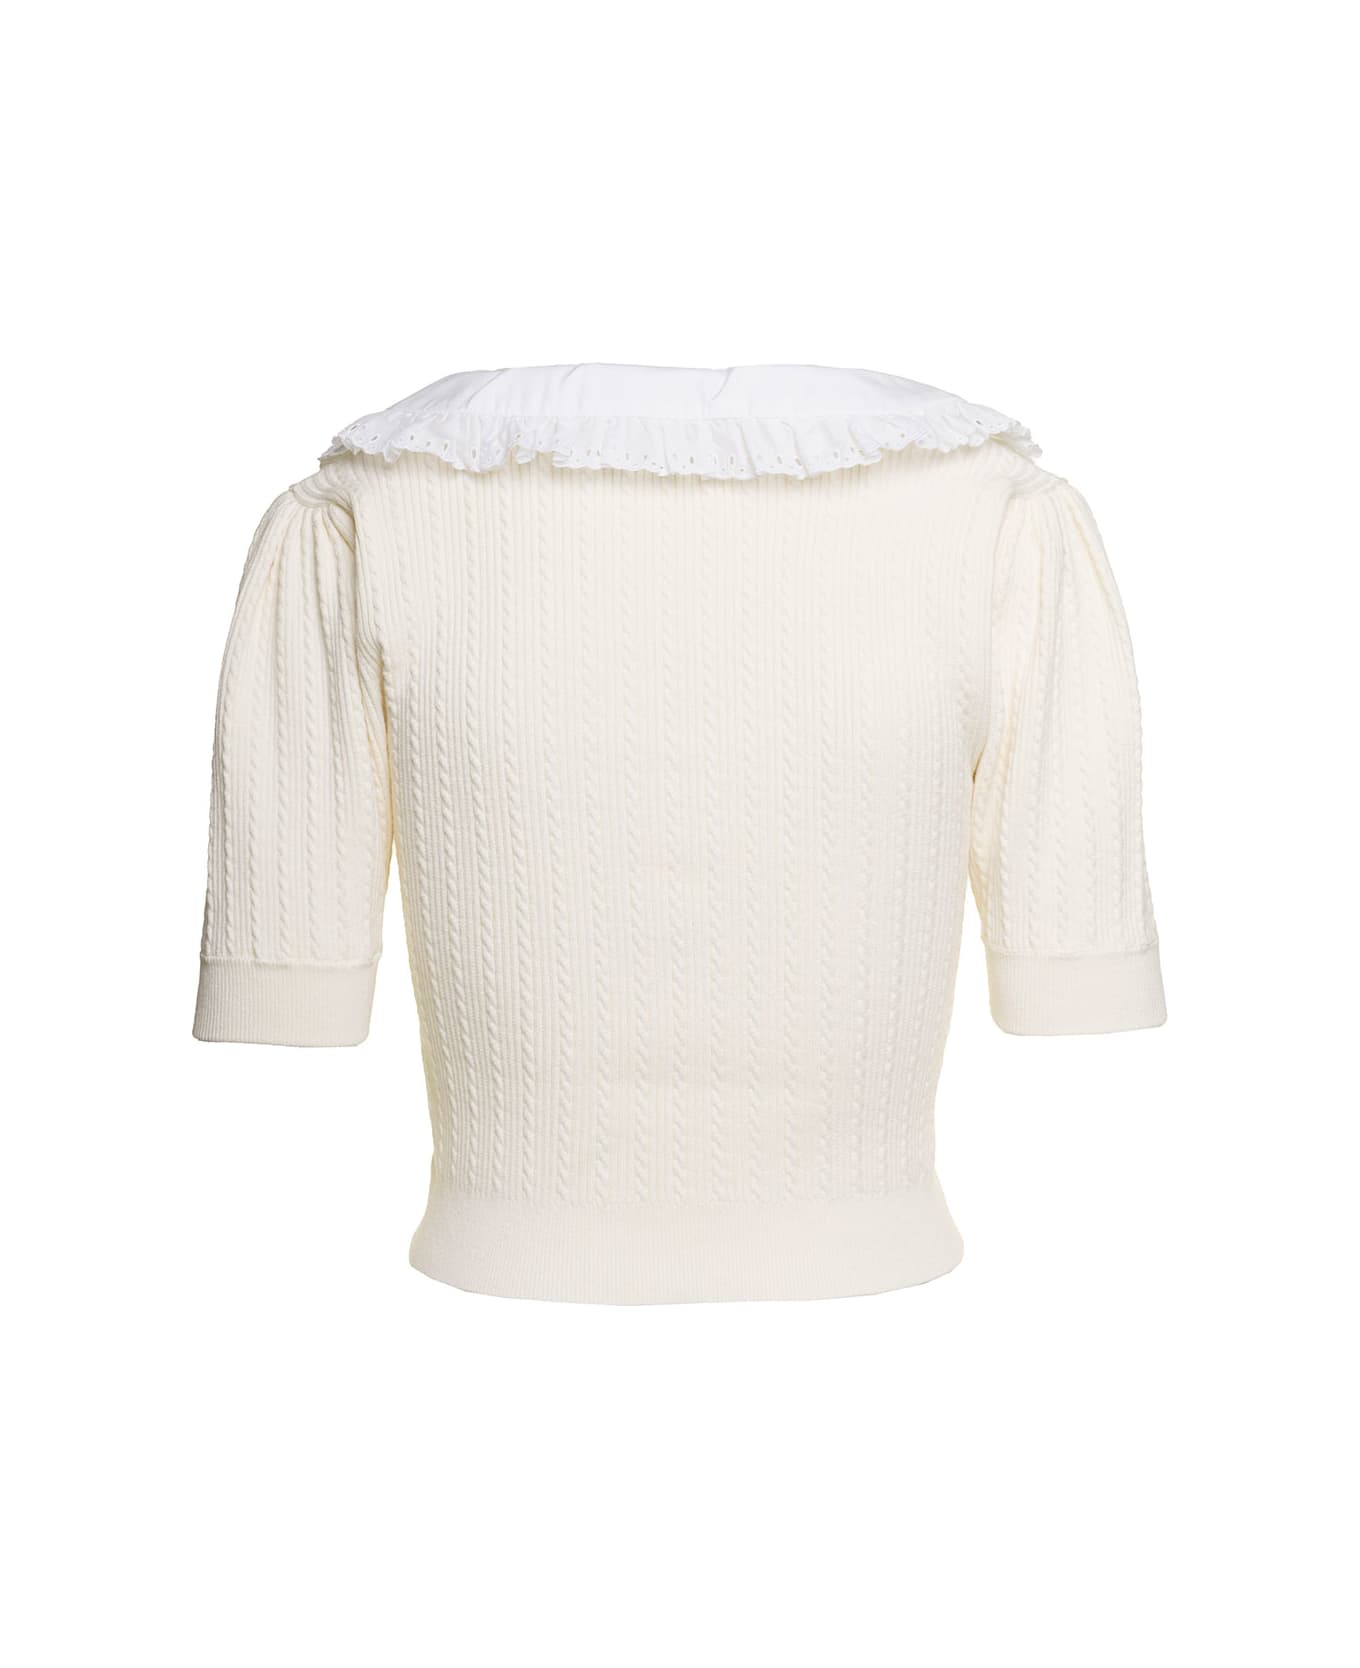 Alessandra Rich White Knitted Jumper With Bow Detail In Cotton Blend Woman - White